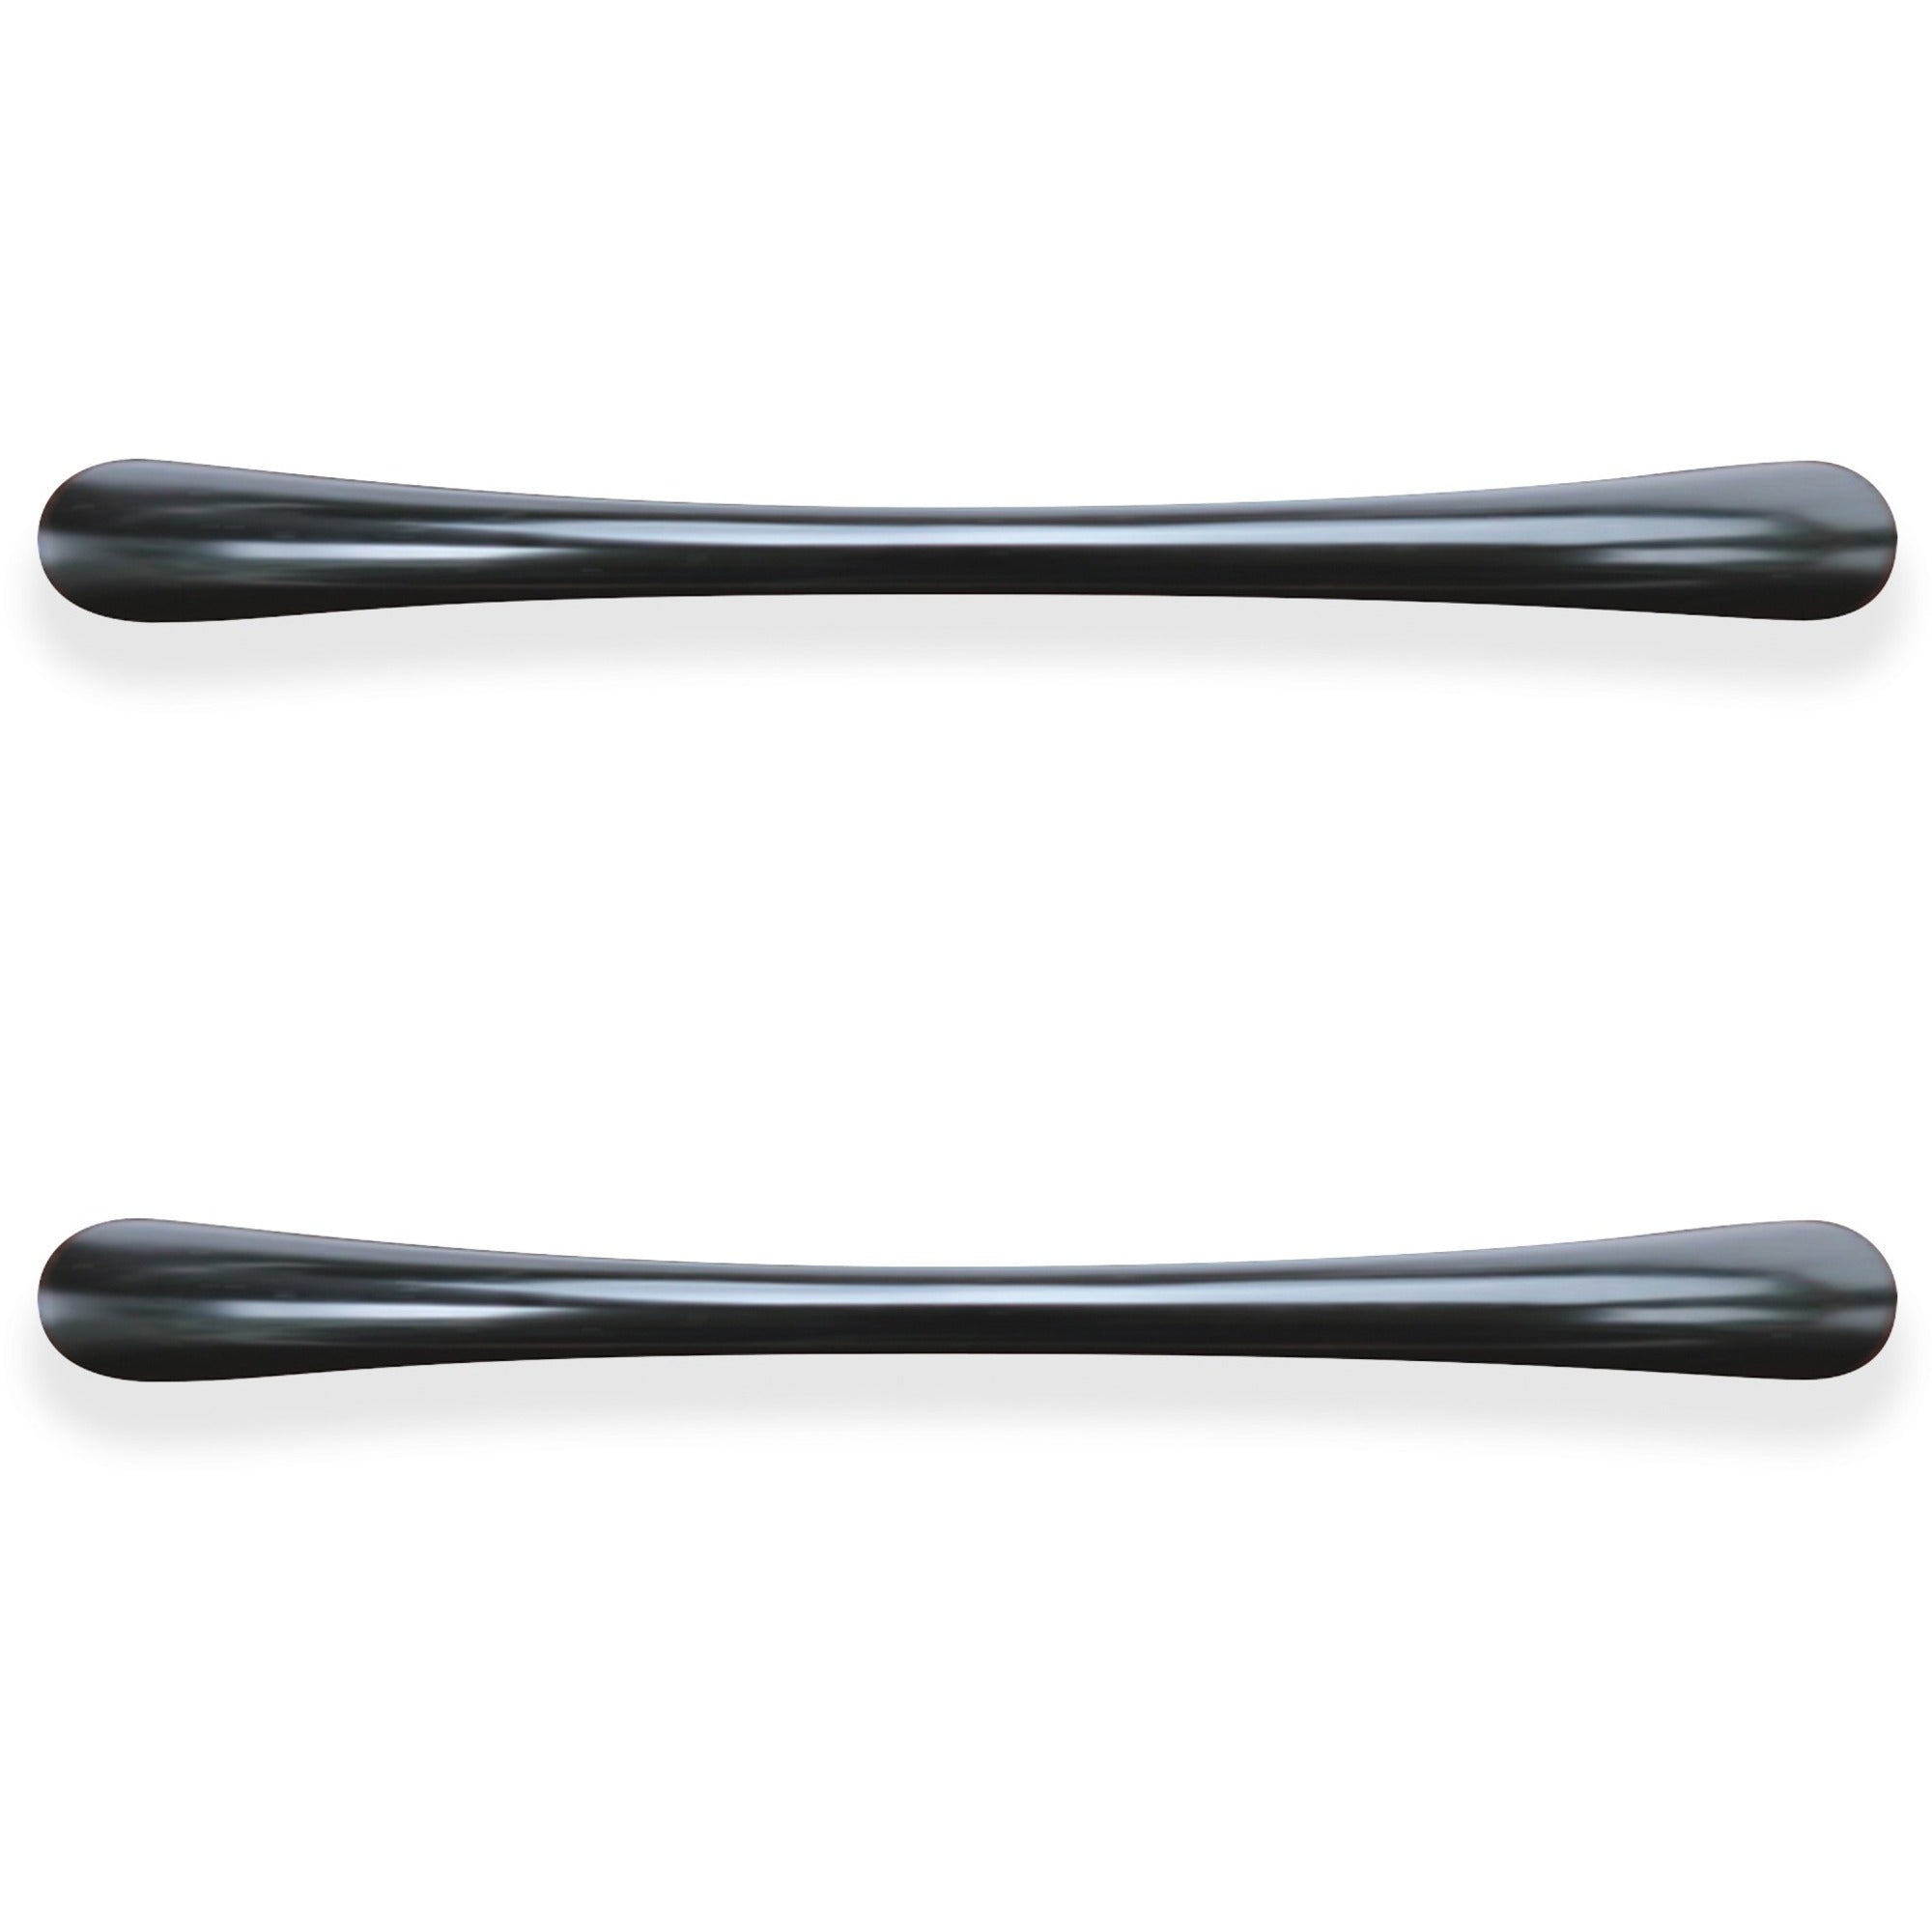 Lorell Chateau Series Laminate Drawer Transitional Pulls - Transitional - 4.5" Width x 0.4" Depth x 1" Height - Aluminum Alloy - Black - 